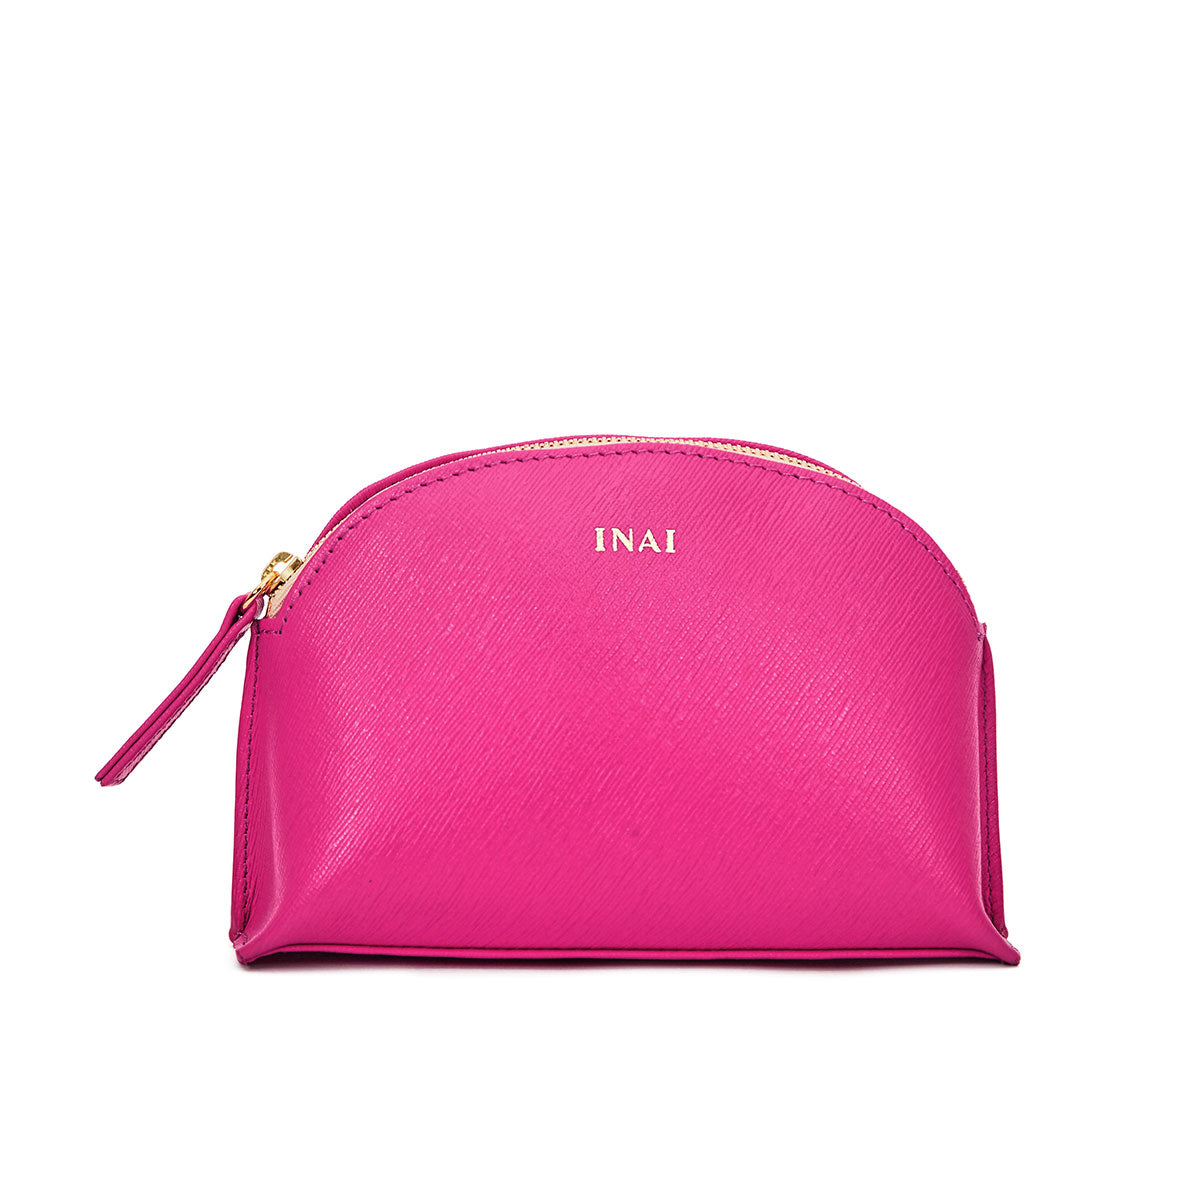 Shop this Cosmetic pouch by Inai | Refash – REFASH